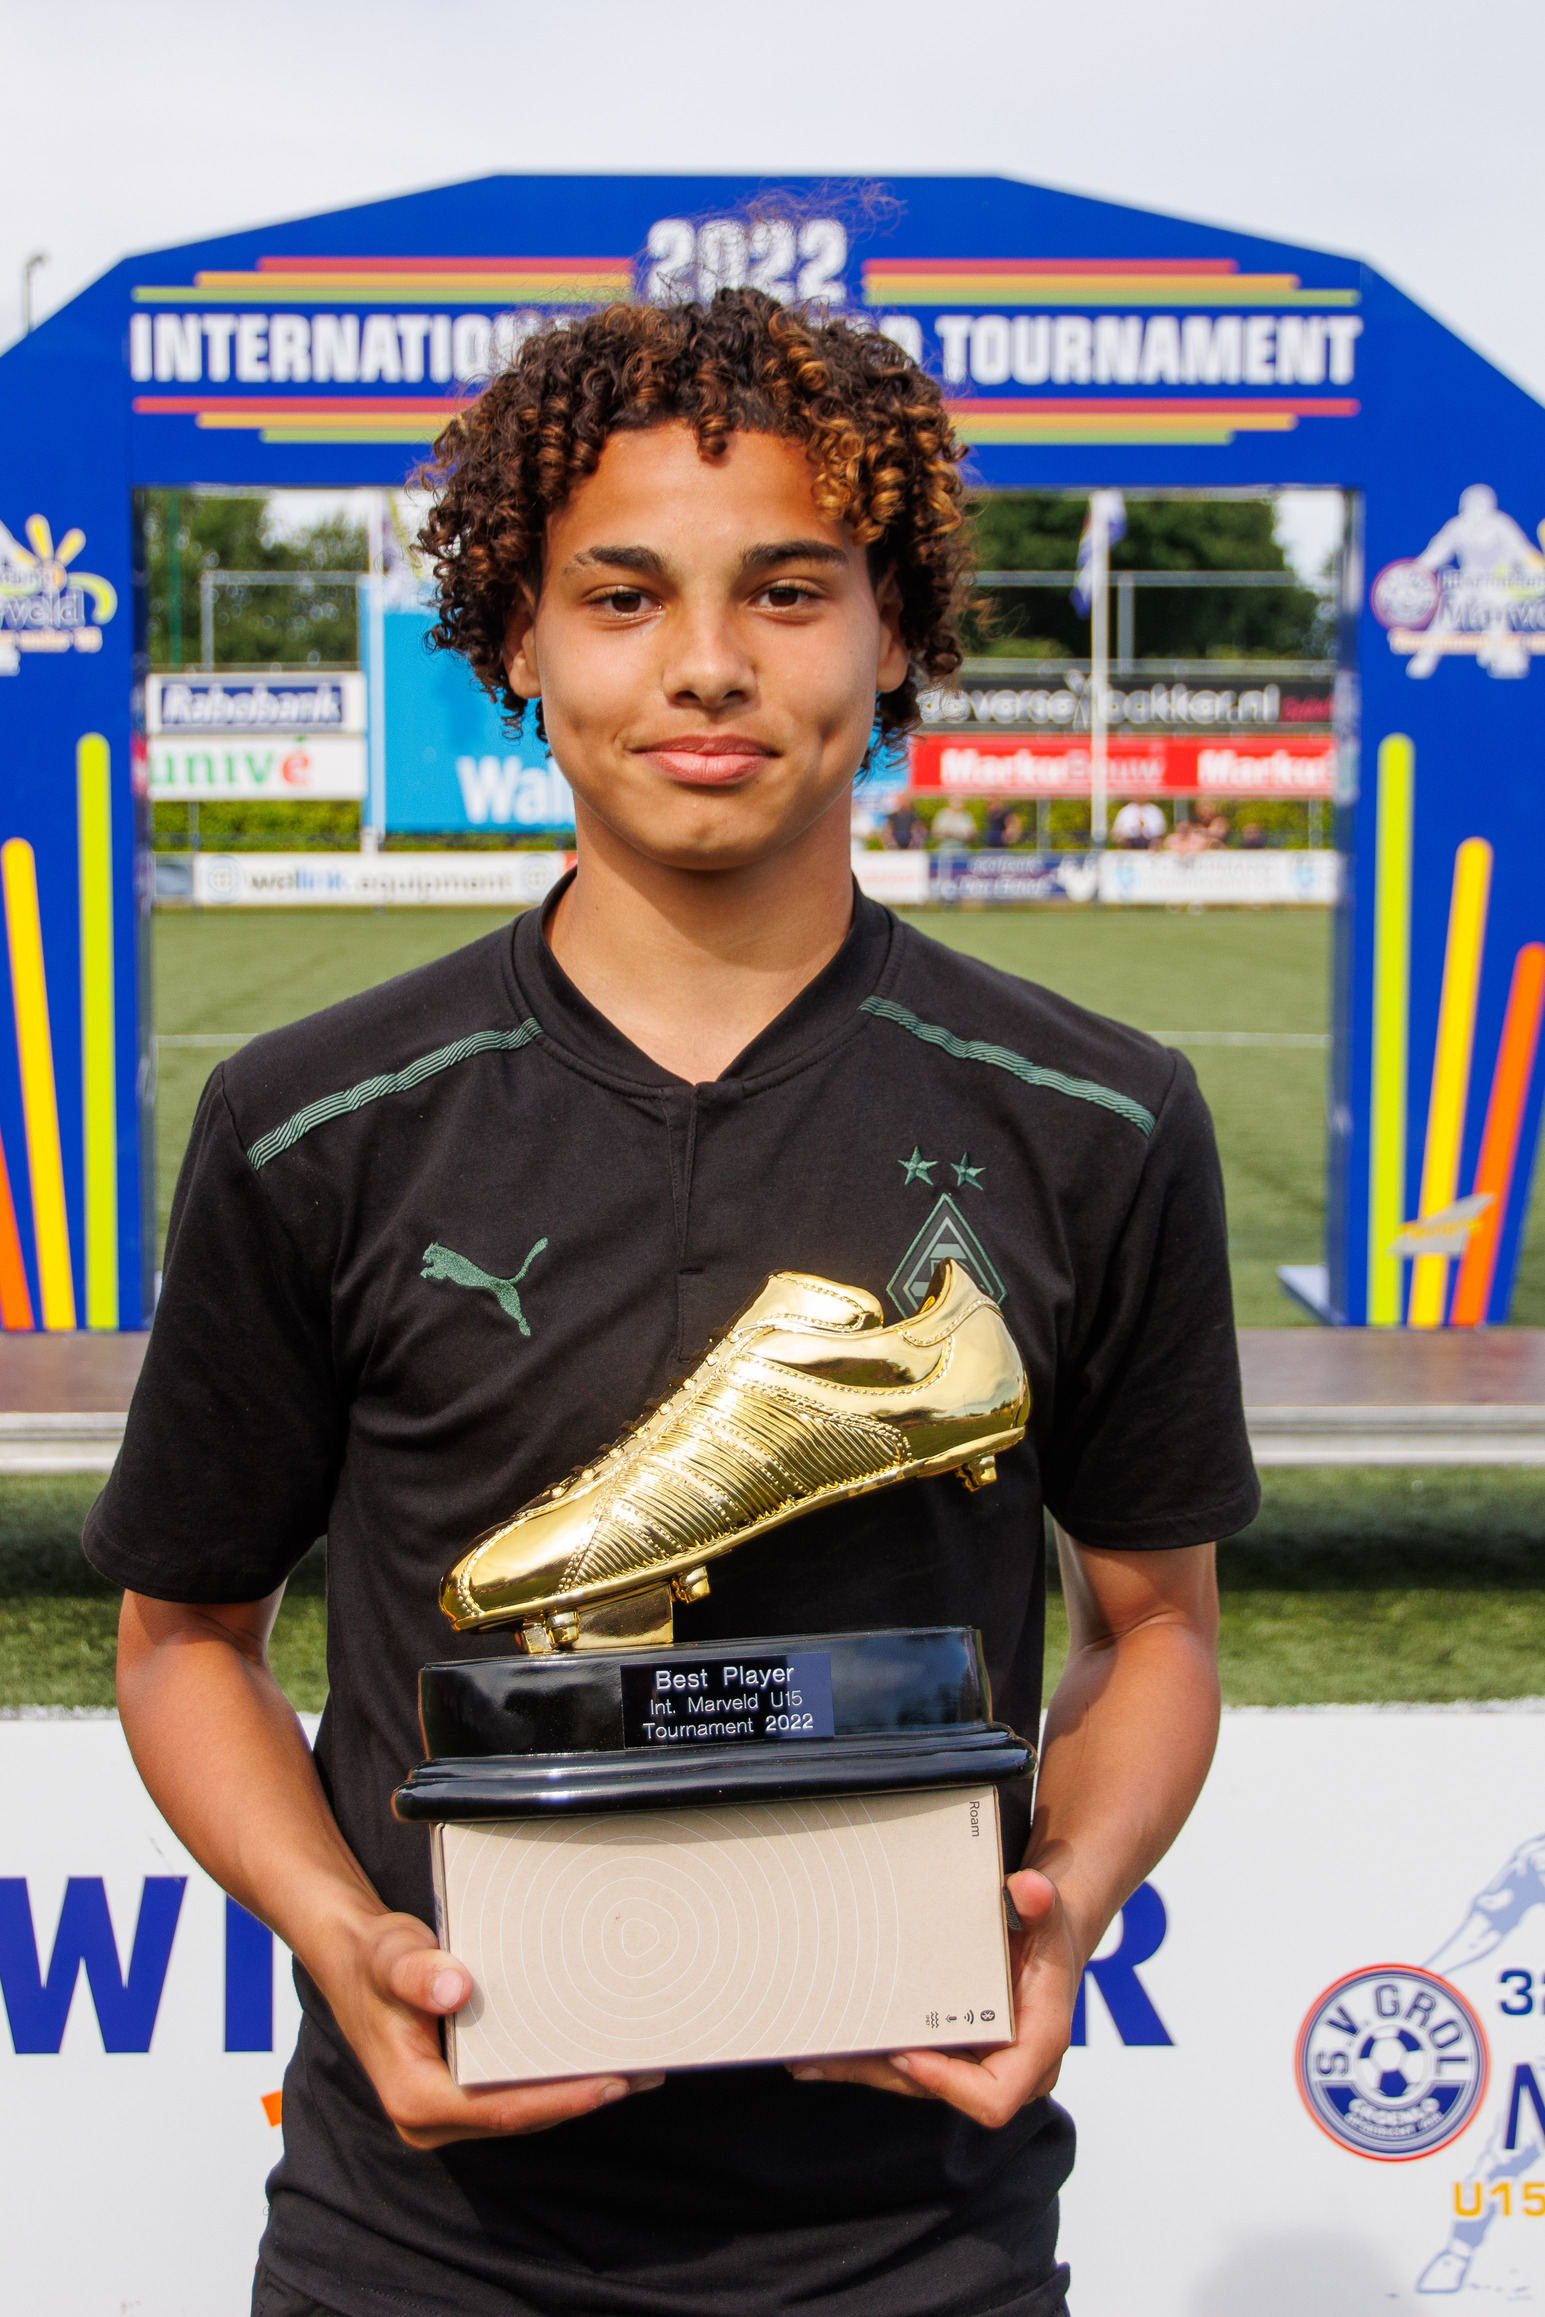 Marveld Tournament 2022 - Presentation of the prices - Kilian Sauck, best player of the tournament